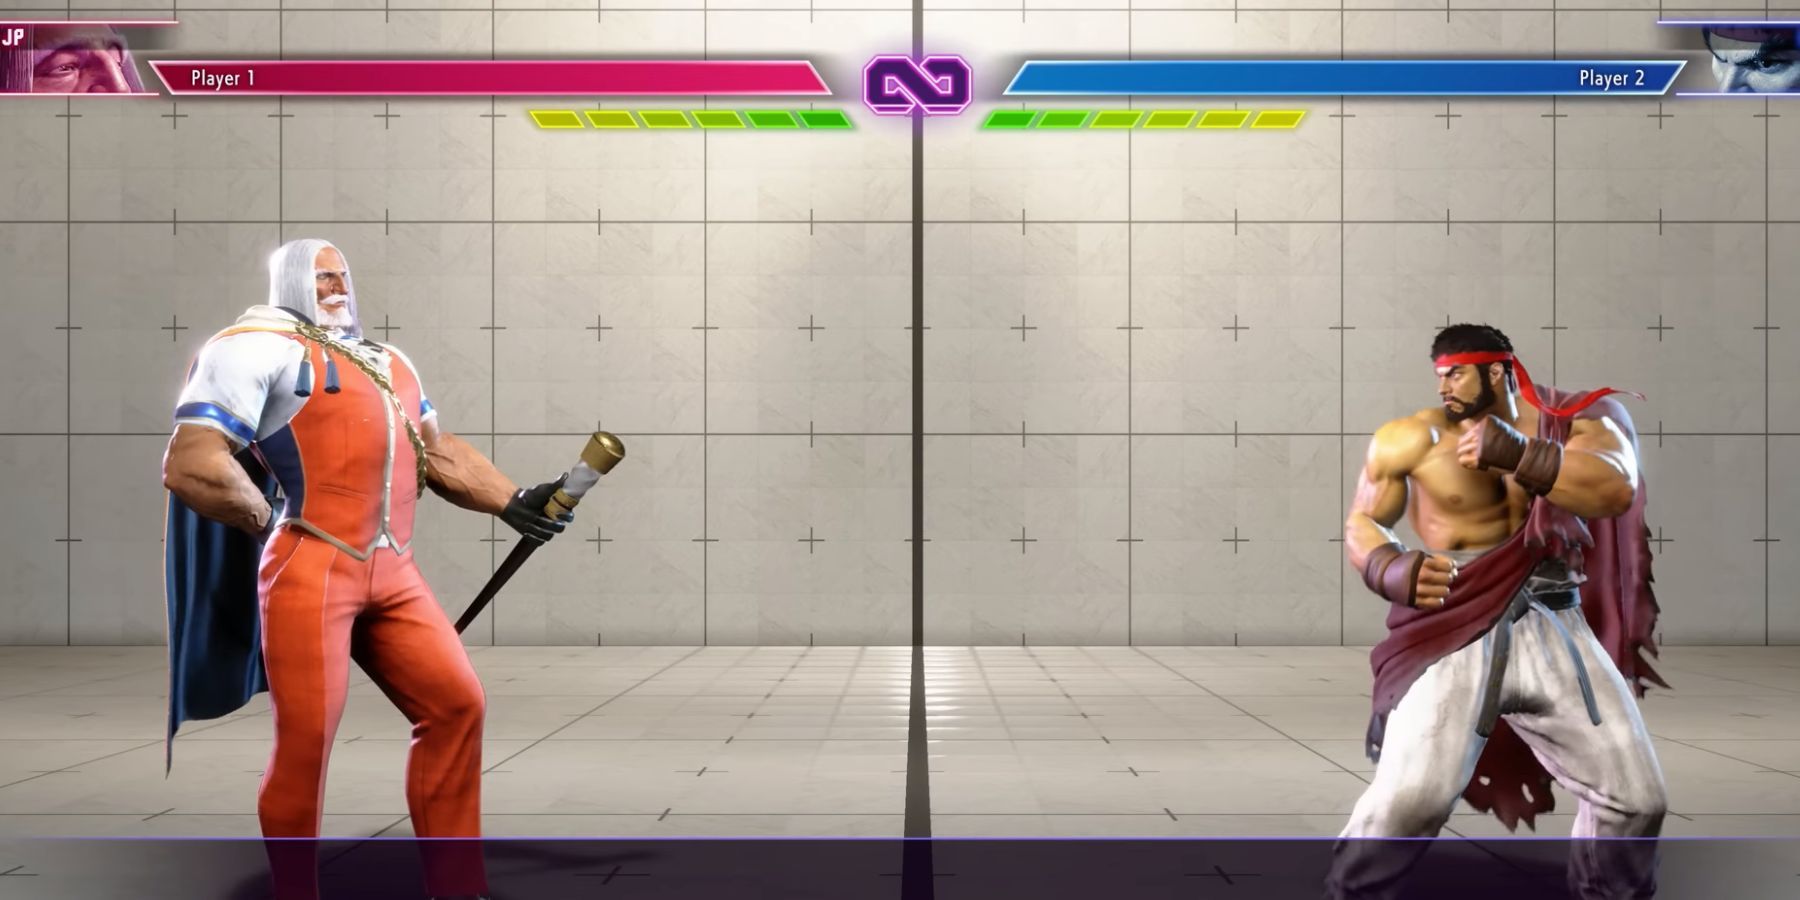 image showing jp against ryu in a street fighter 6 match.